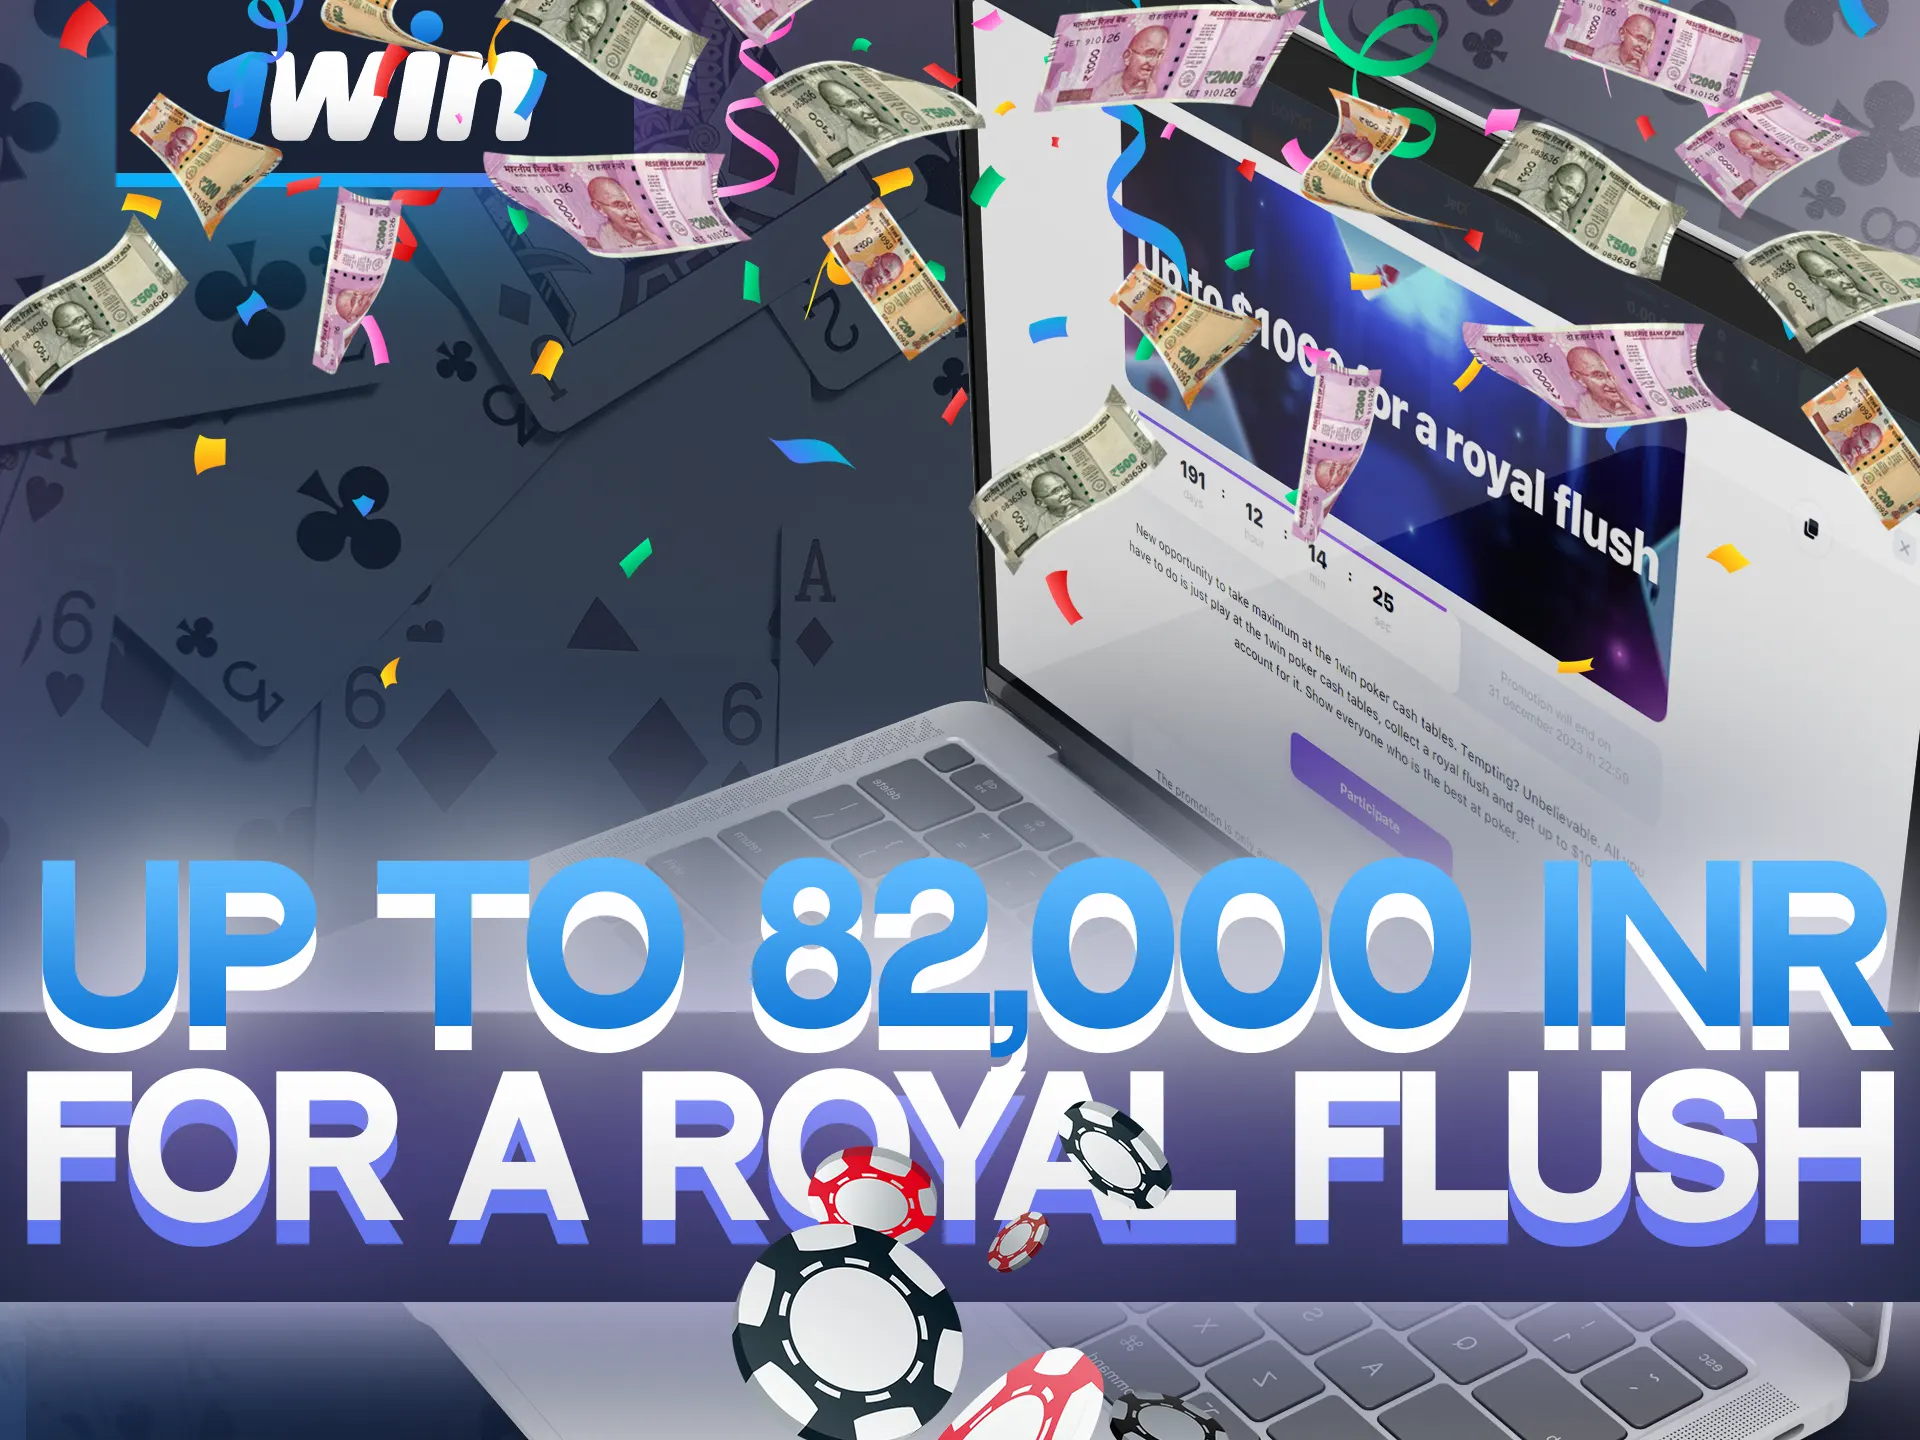 Get a special royal flush bonus with 1Win.